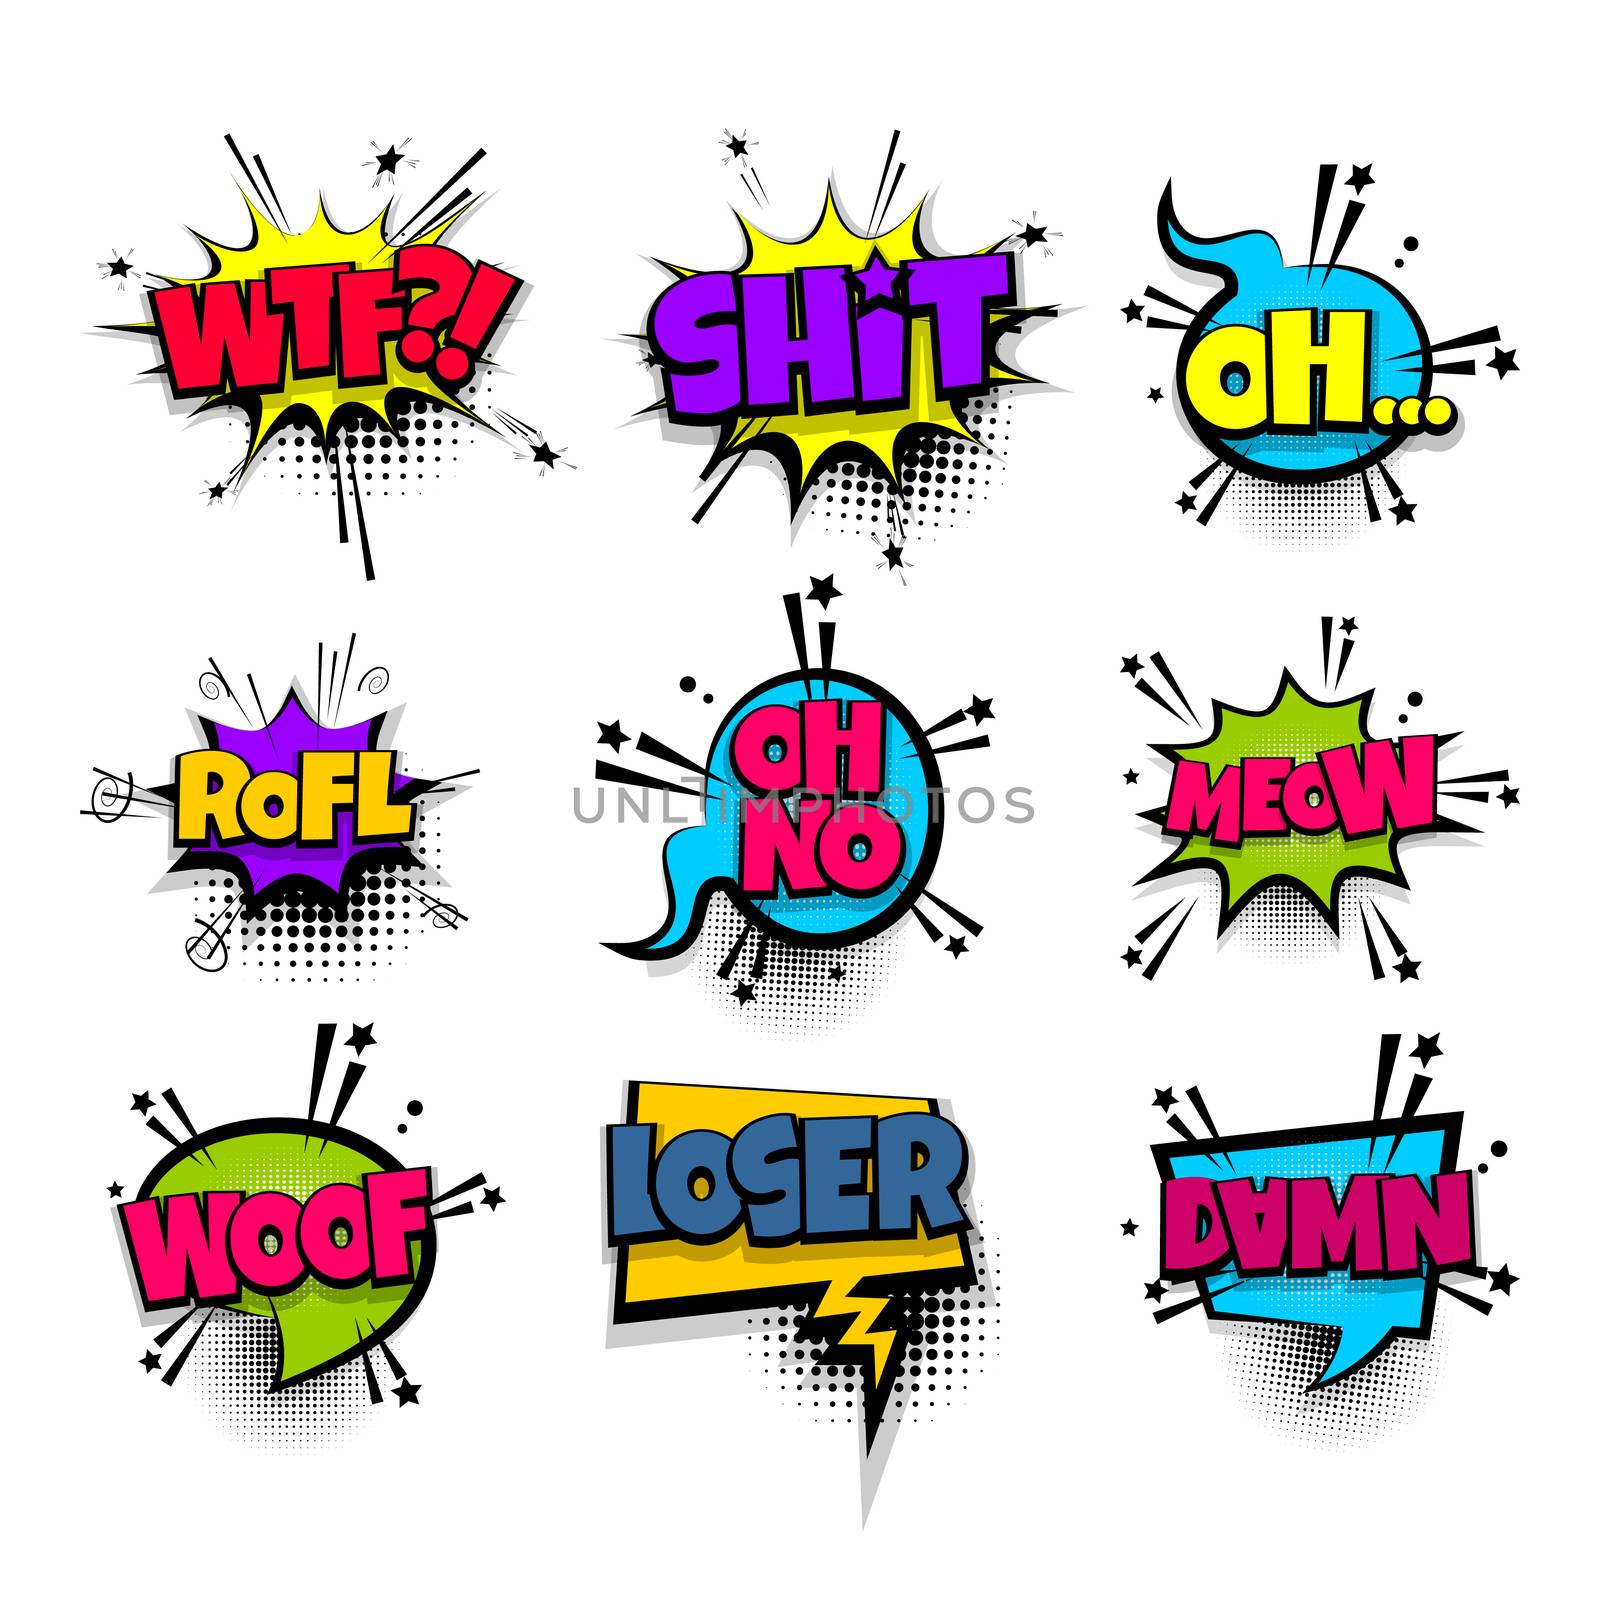 wtf shit meow woof loser set lettering. Comics book balloon. Bubble icon speech pop art phrase. Cartoon font label tag expression. Comic text sound effects. Vector illustration.